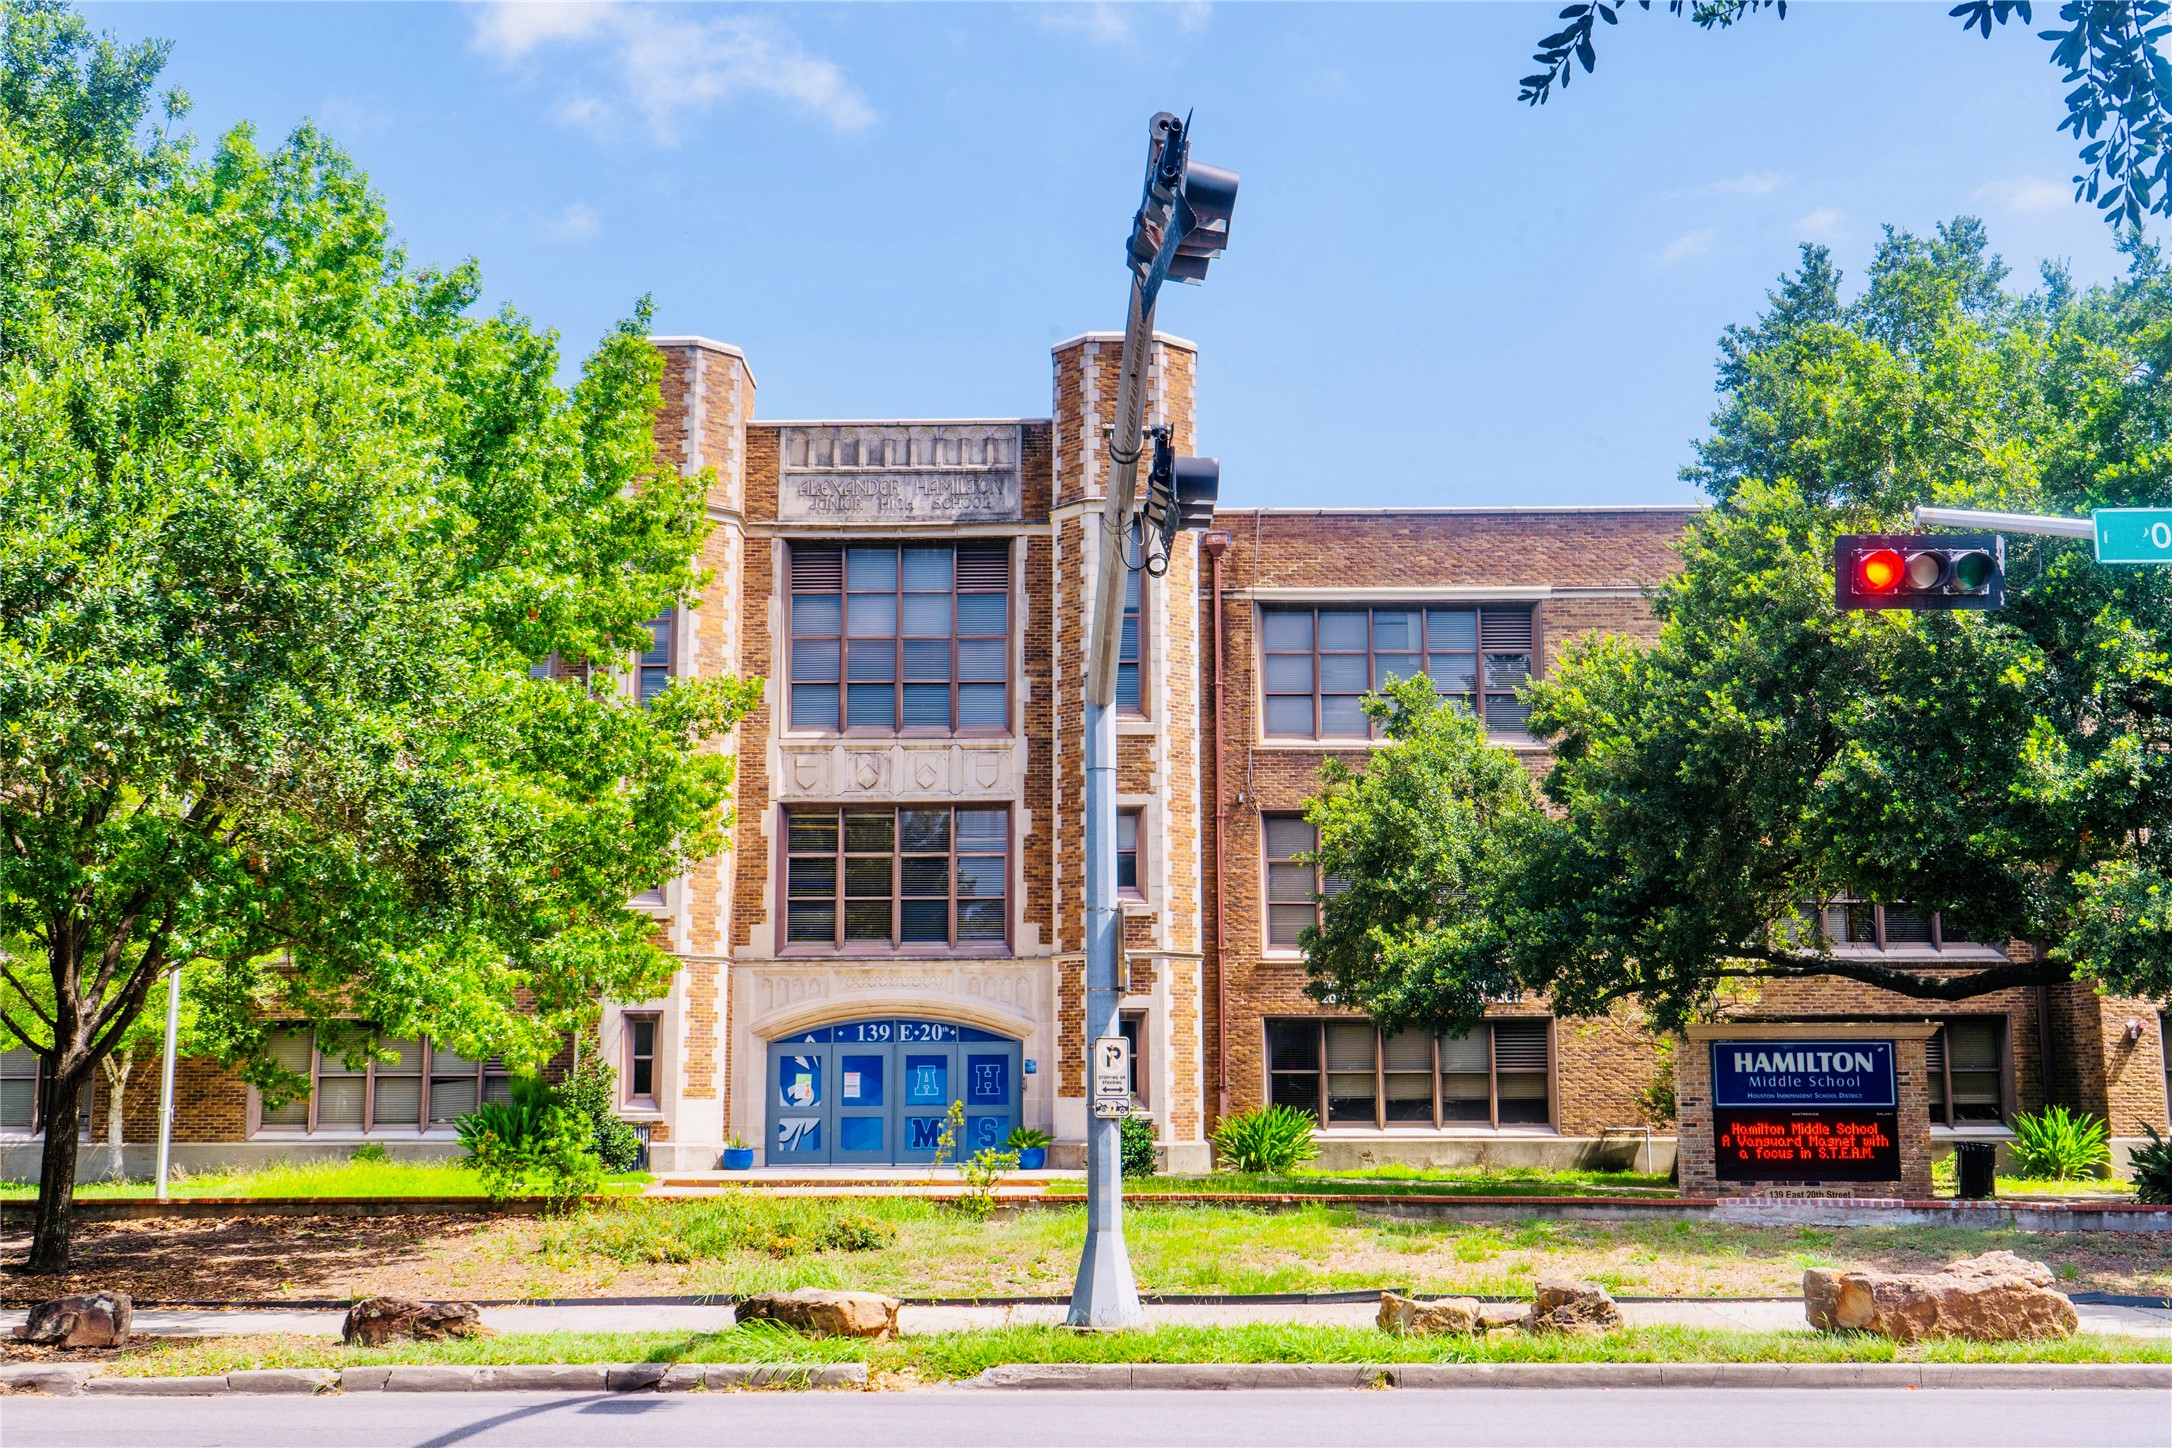 Distinguished Hamilton Middle School was founded in 1919 and is located in the historic Houston Heights.